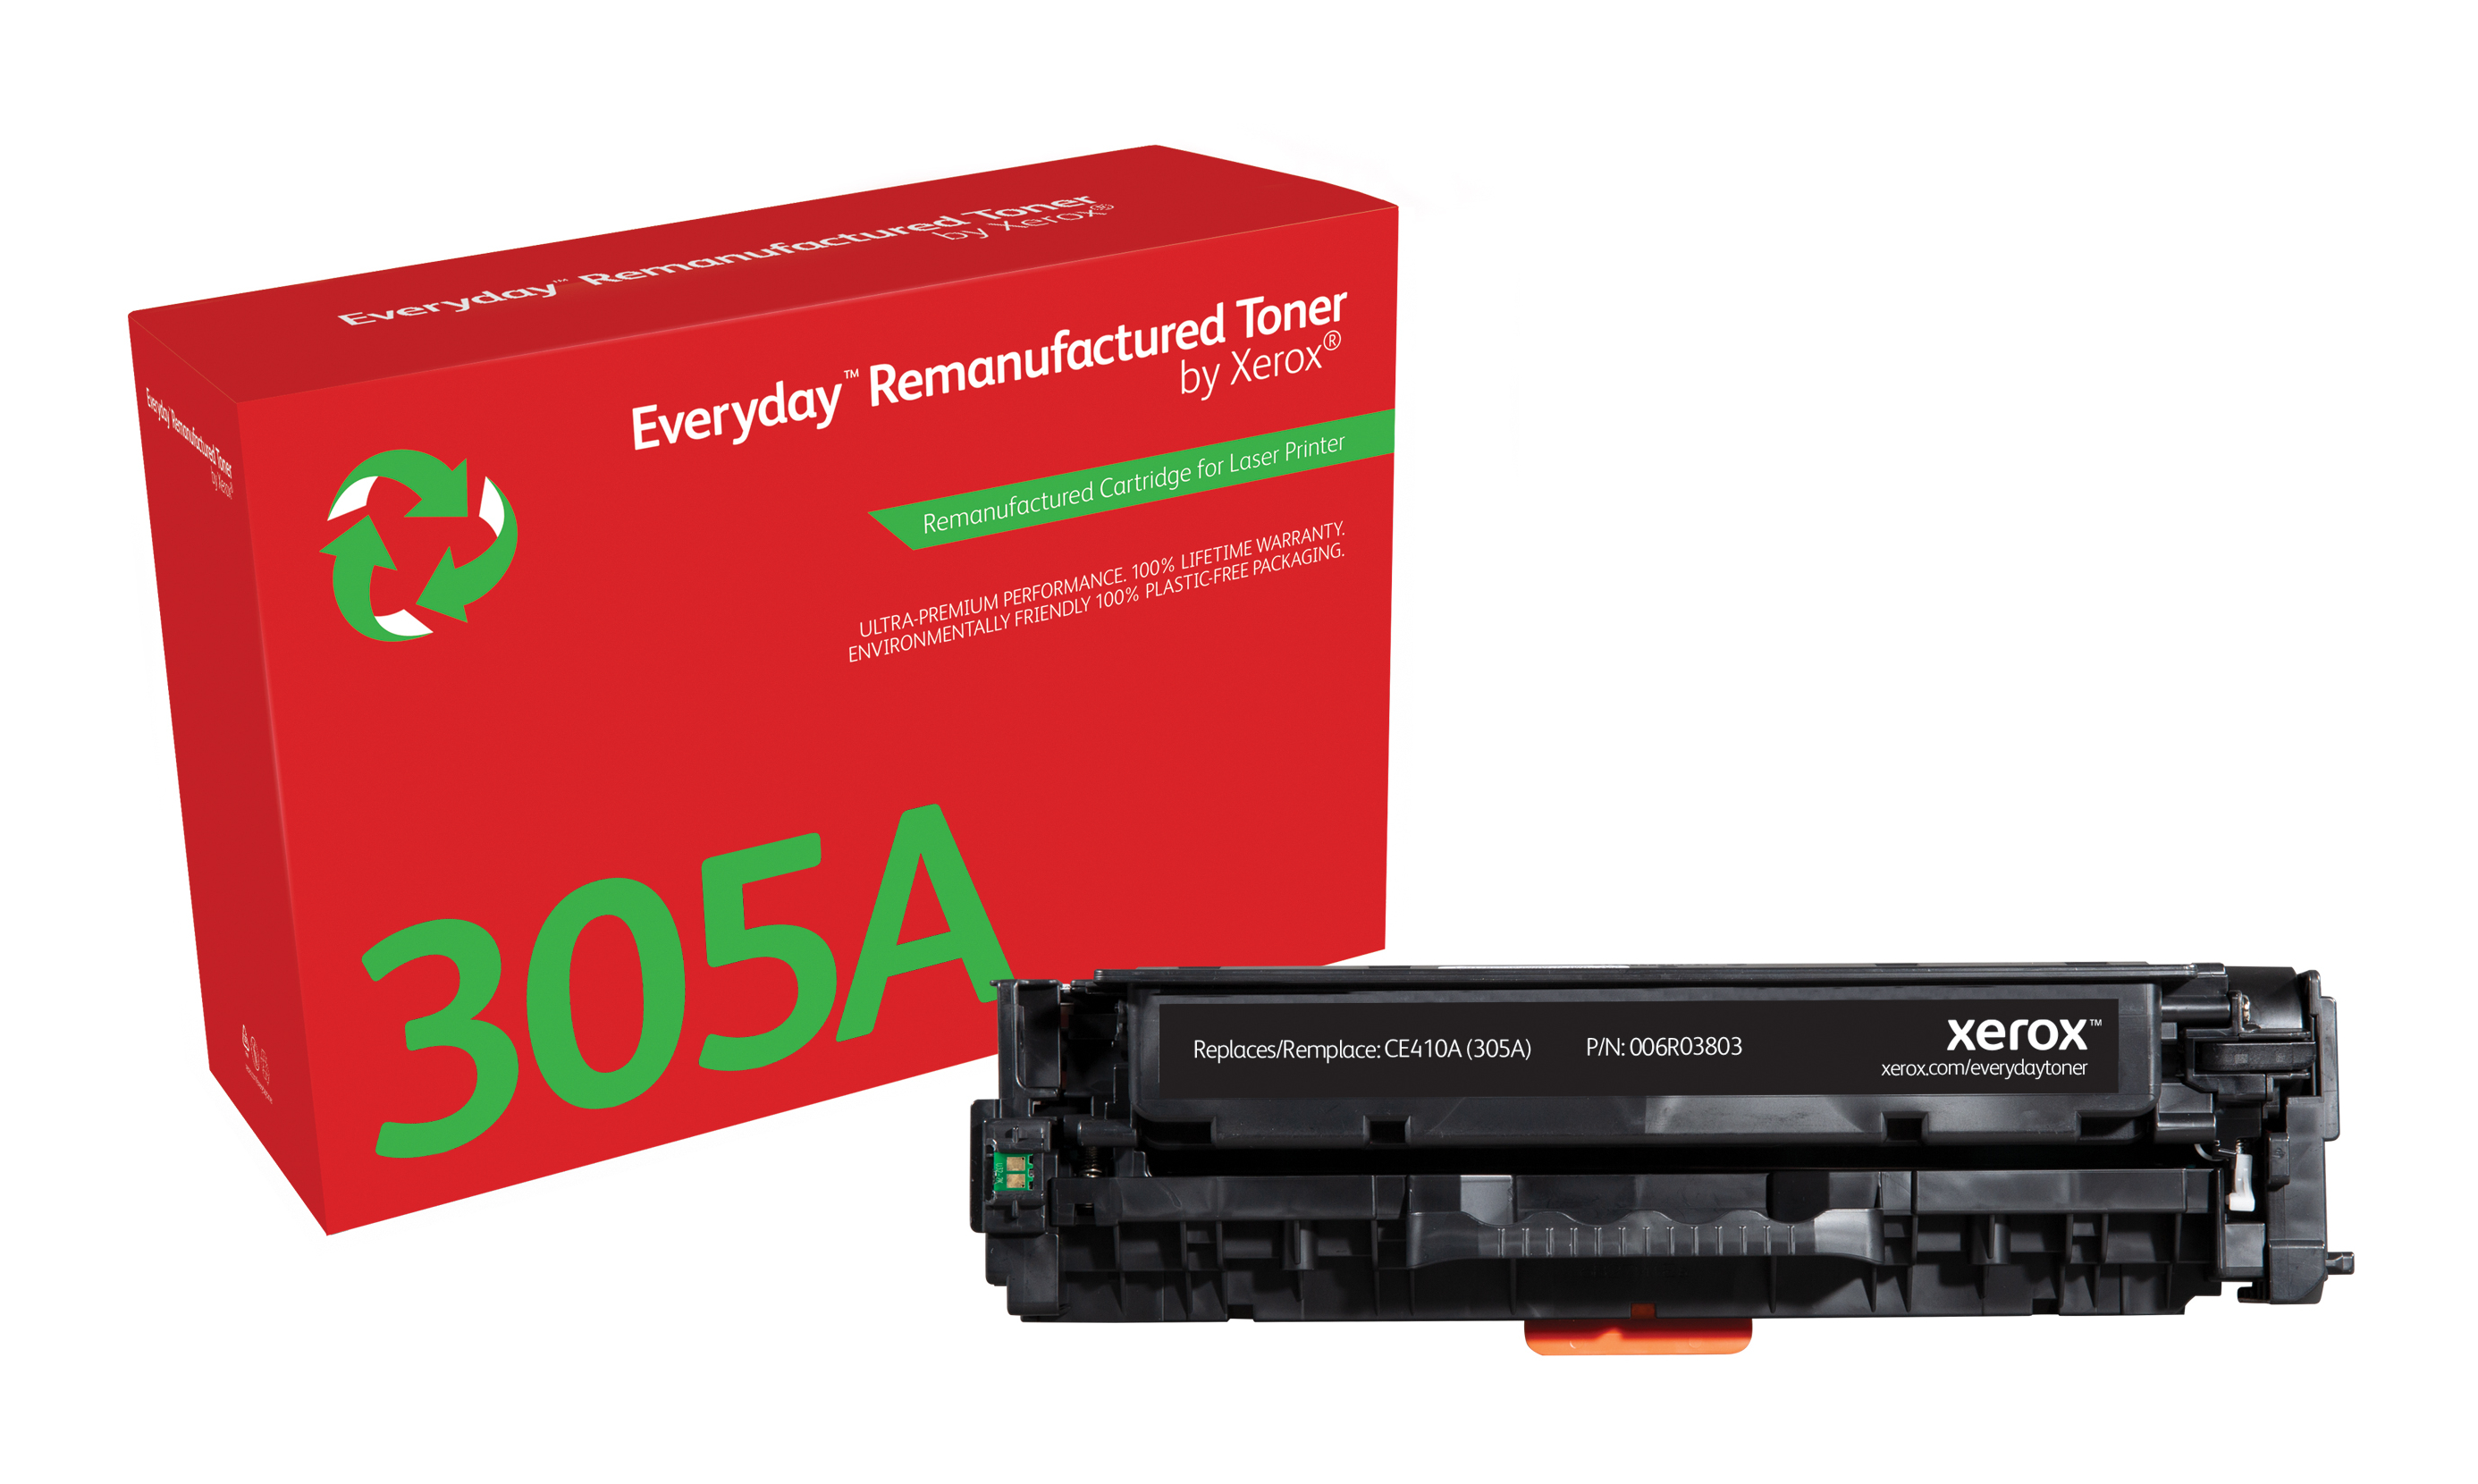 Everyday Black Toner compatible HP 305A (CE410A), 006R03803 by Xerox